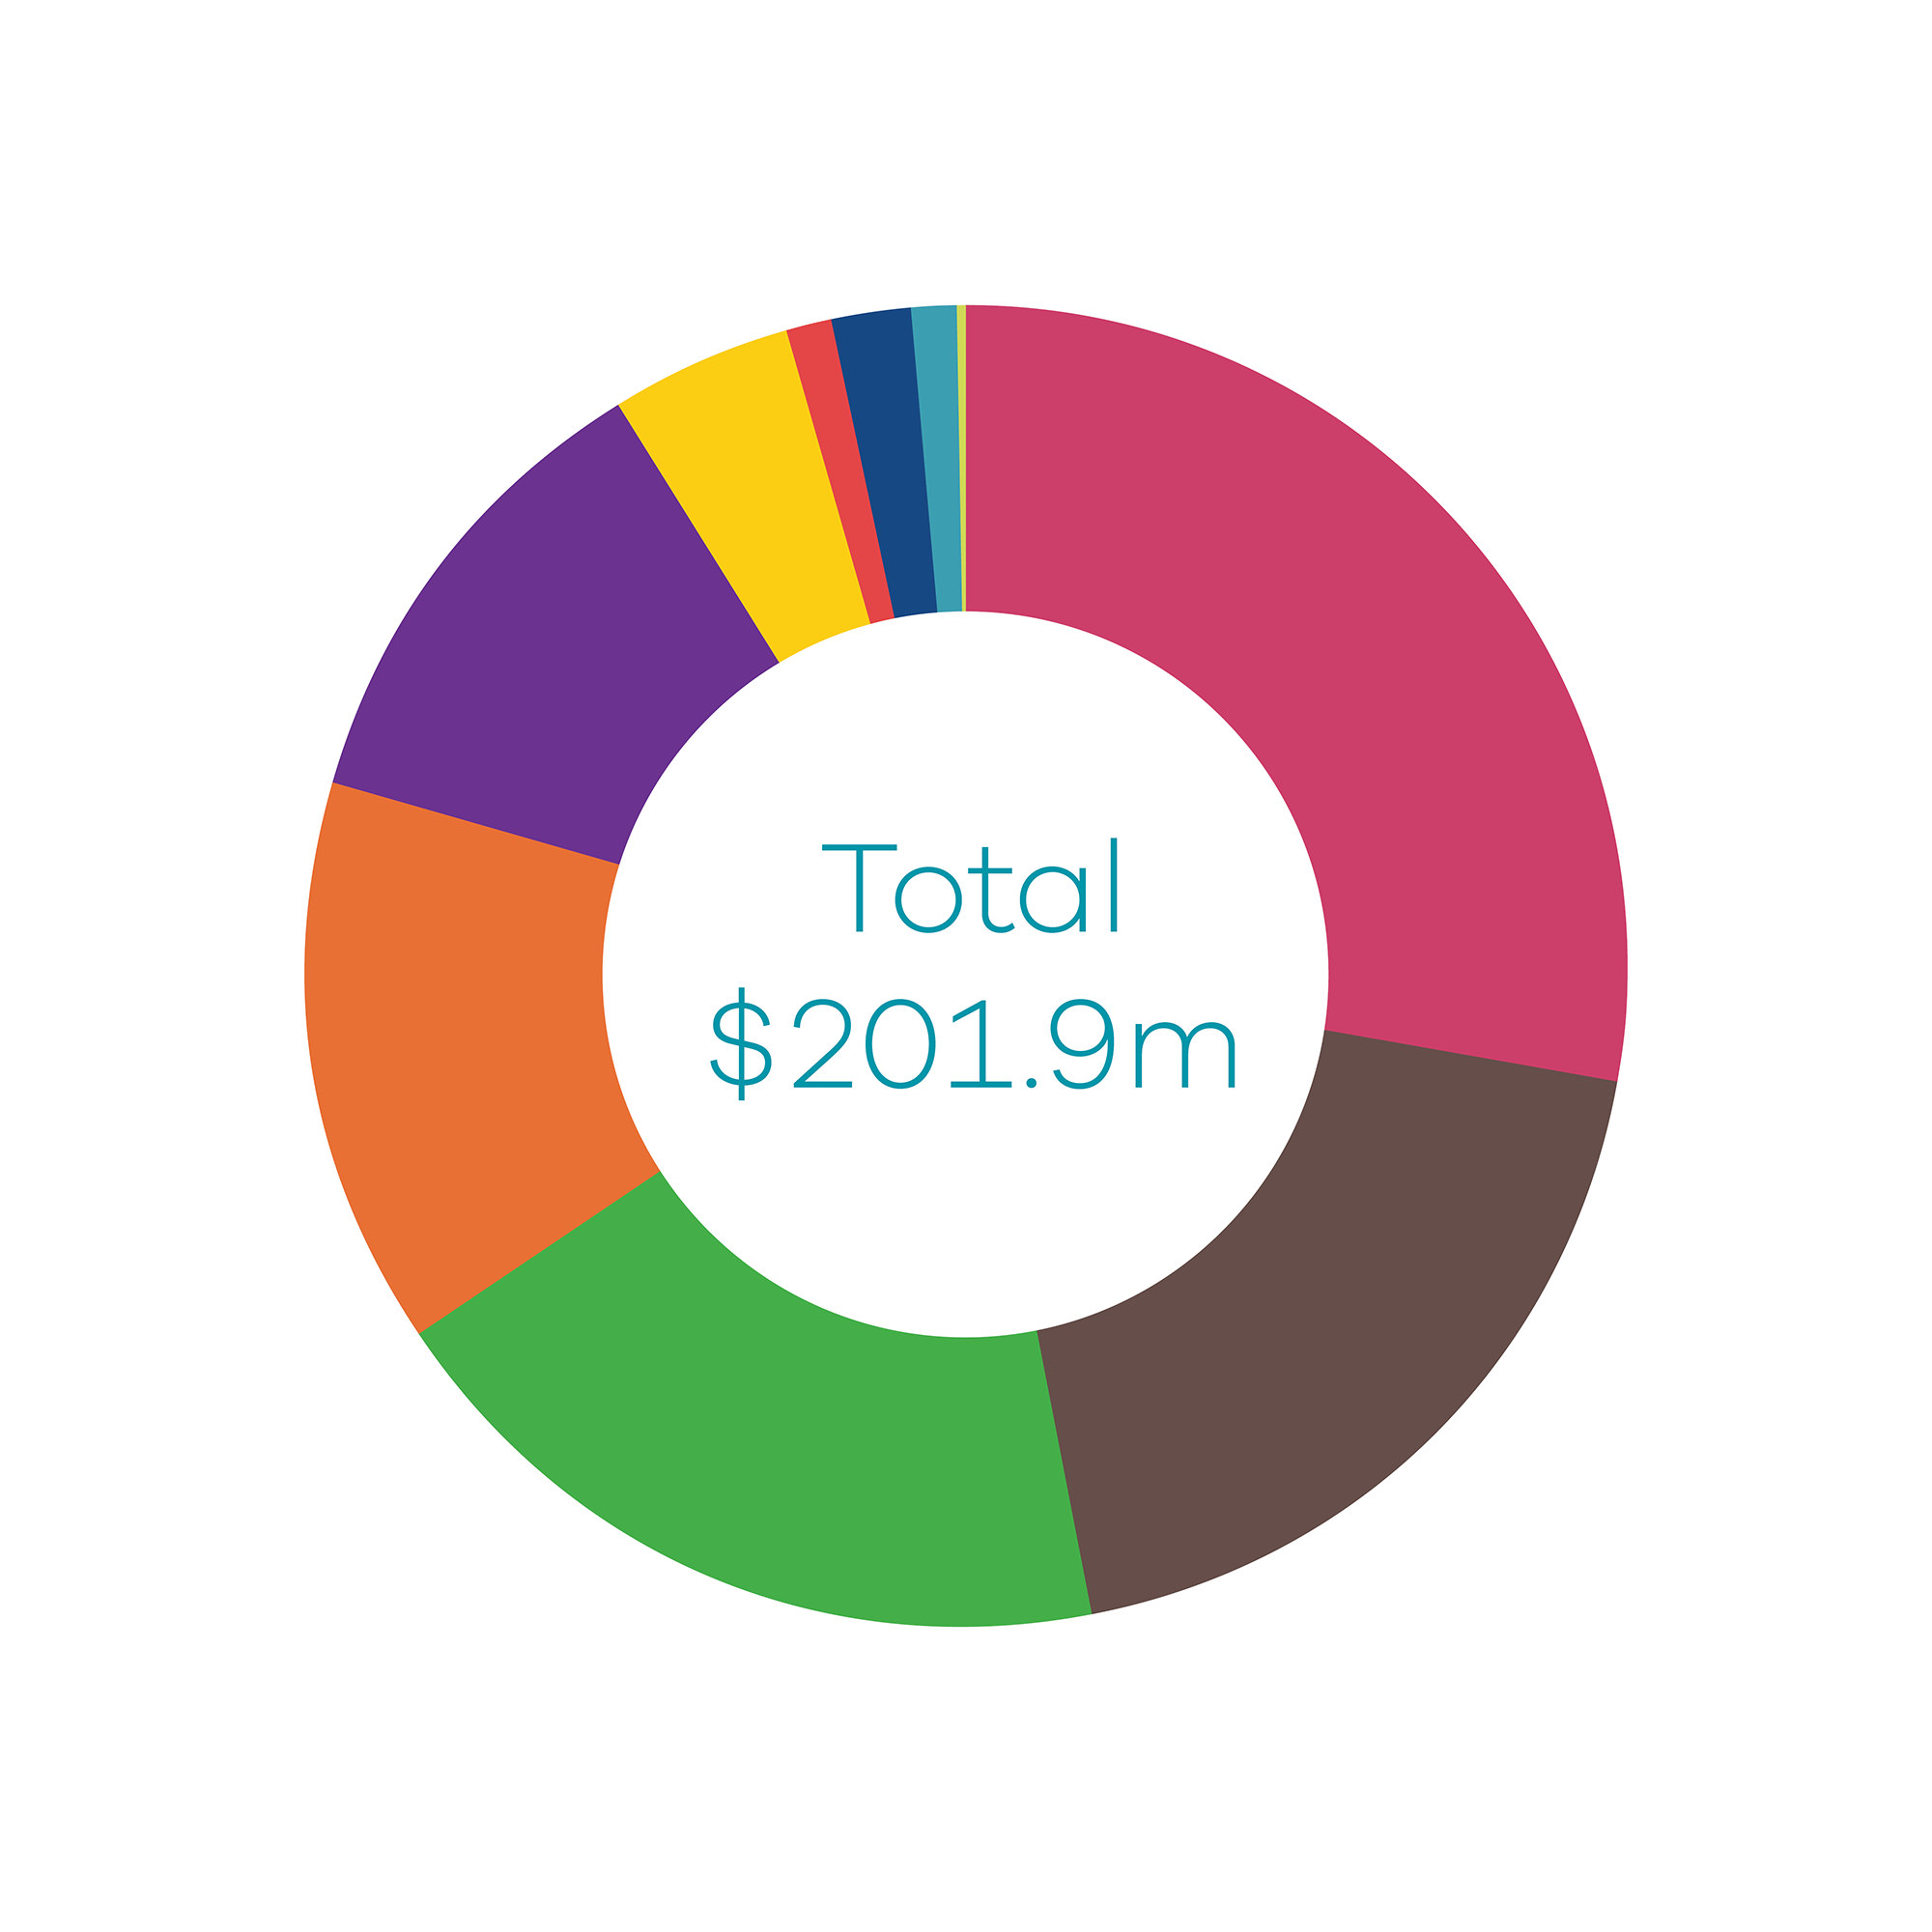 A pie graph breaking down where the funds will be spent